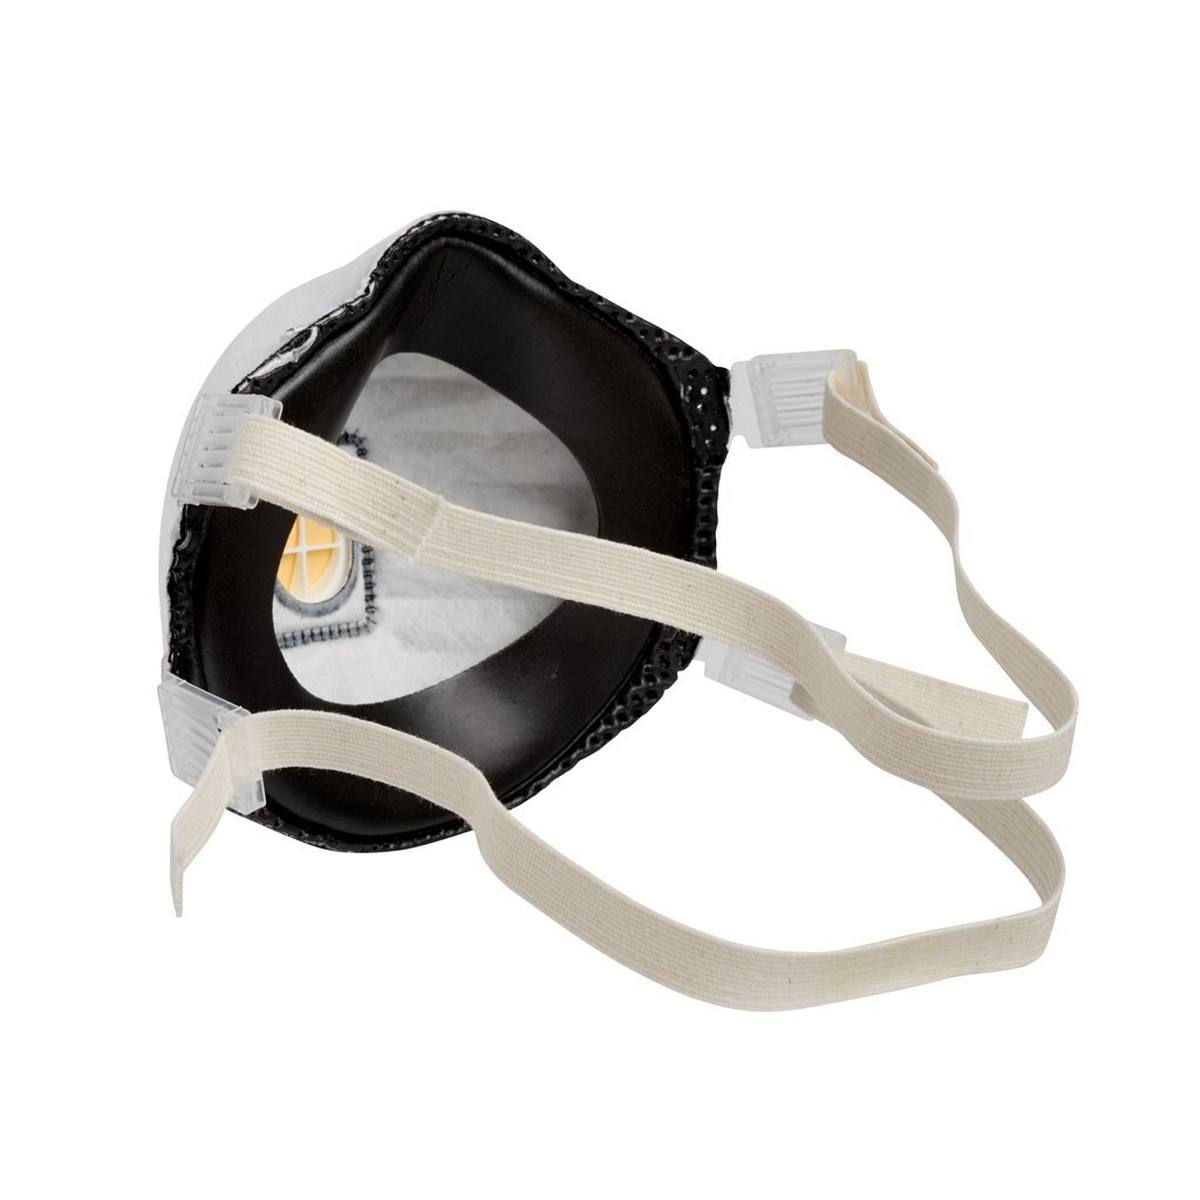 3M 9928 FFP2 R D welding mask with cool-flow exhalation valve against particles up to 10 times the limit value and against ozone. Ideal for welding!